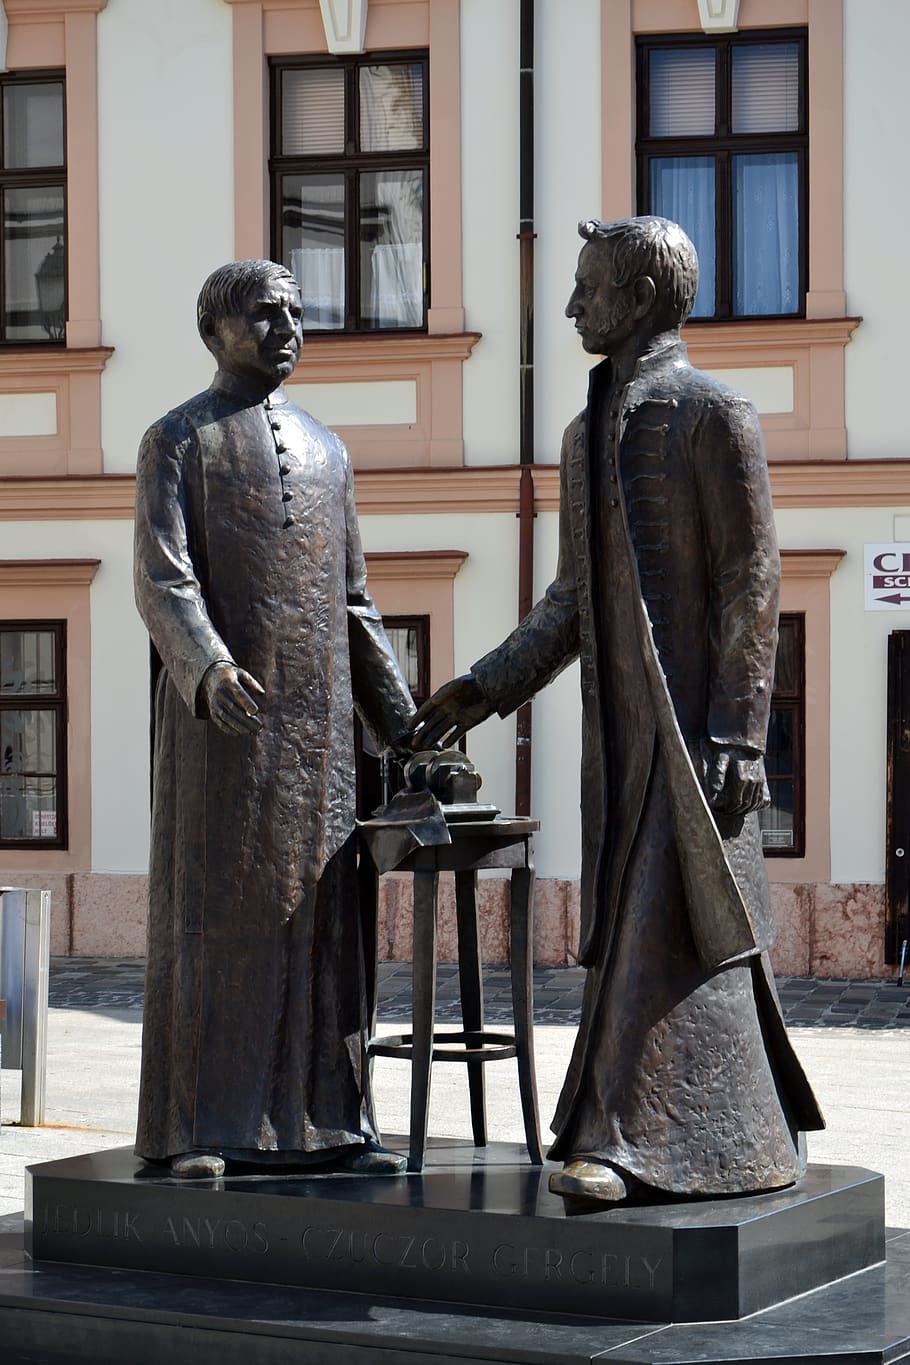 győr, jedlik candidate, five thoughts examines gregory, statue, places of interest, art, liszt ferenc street, downtown, culture, sculpture